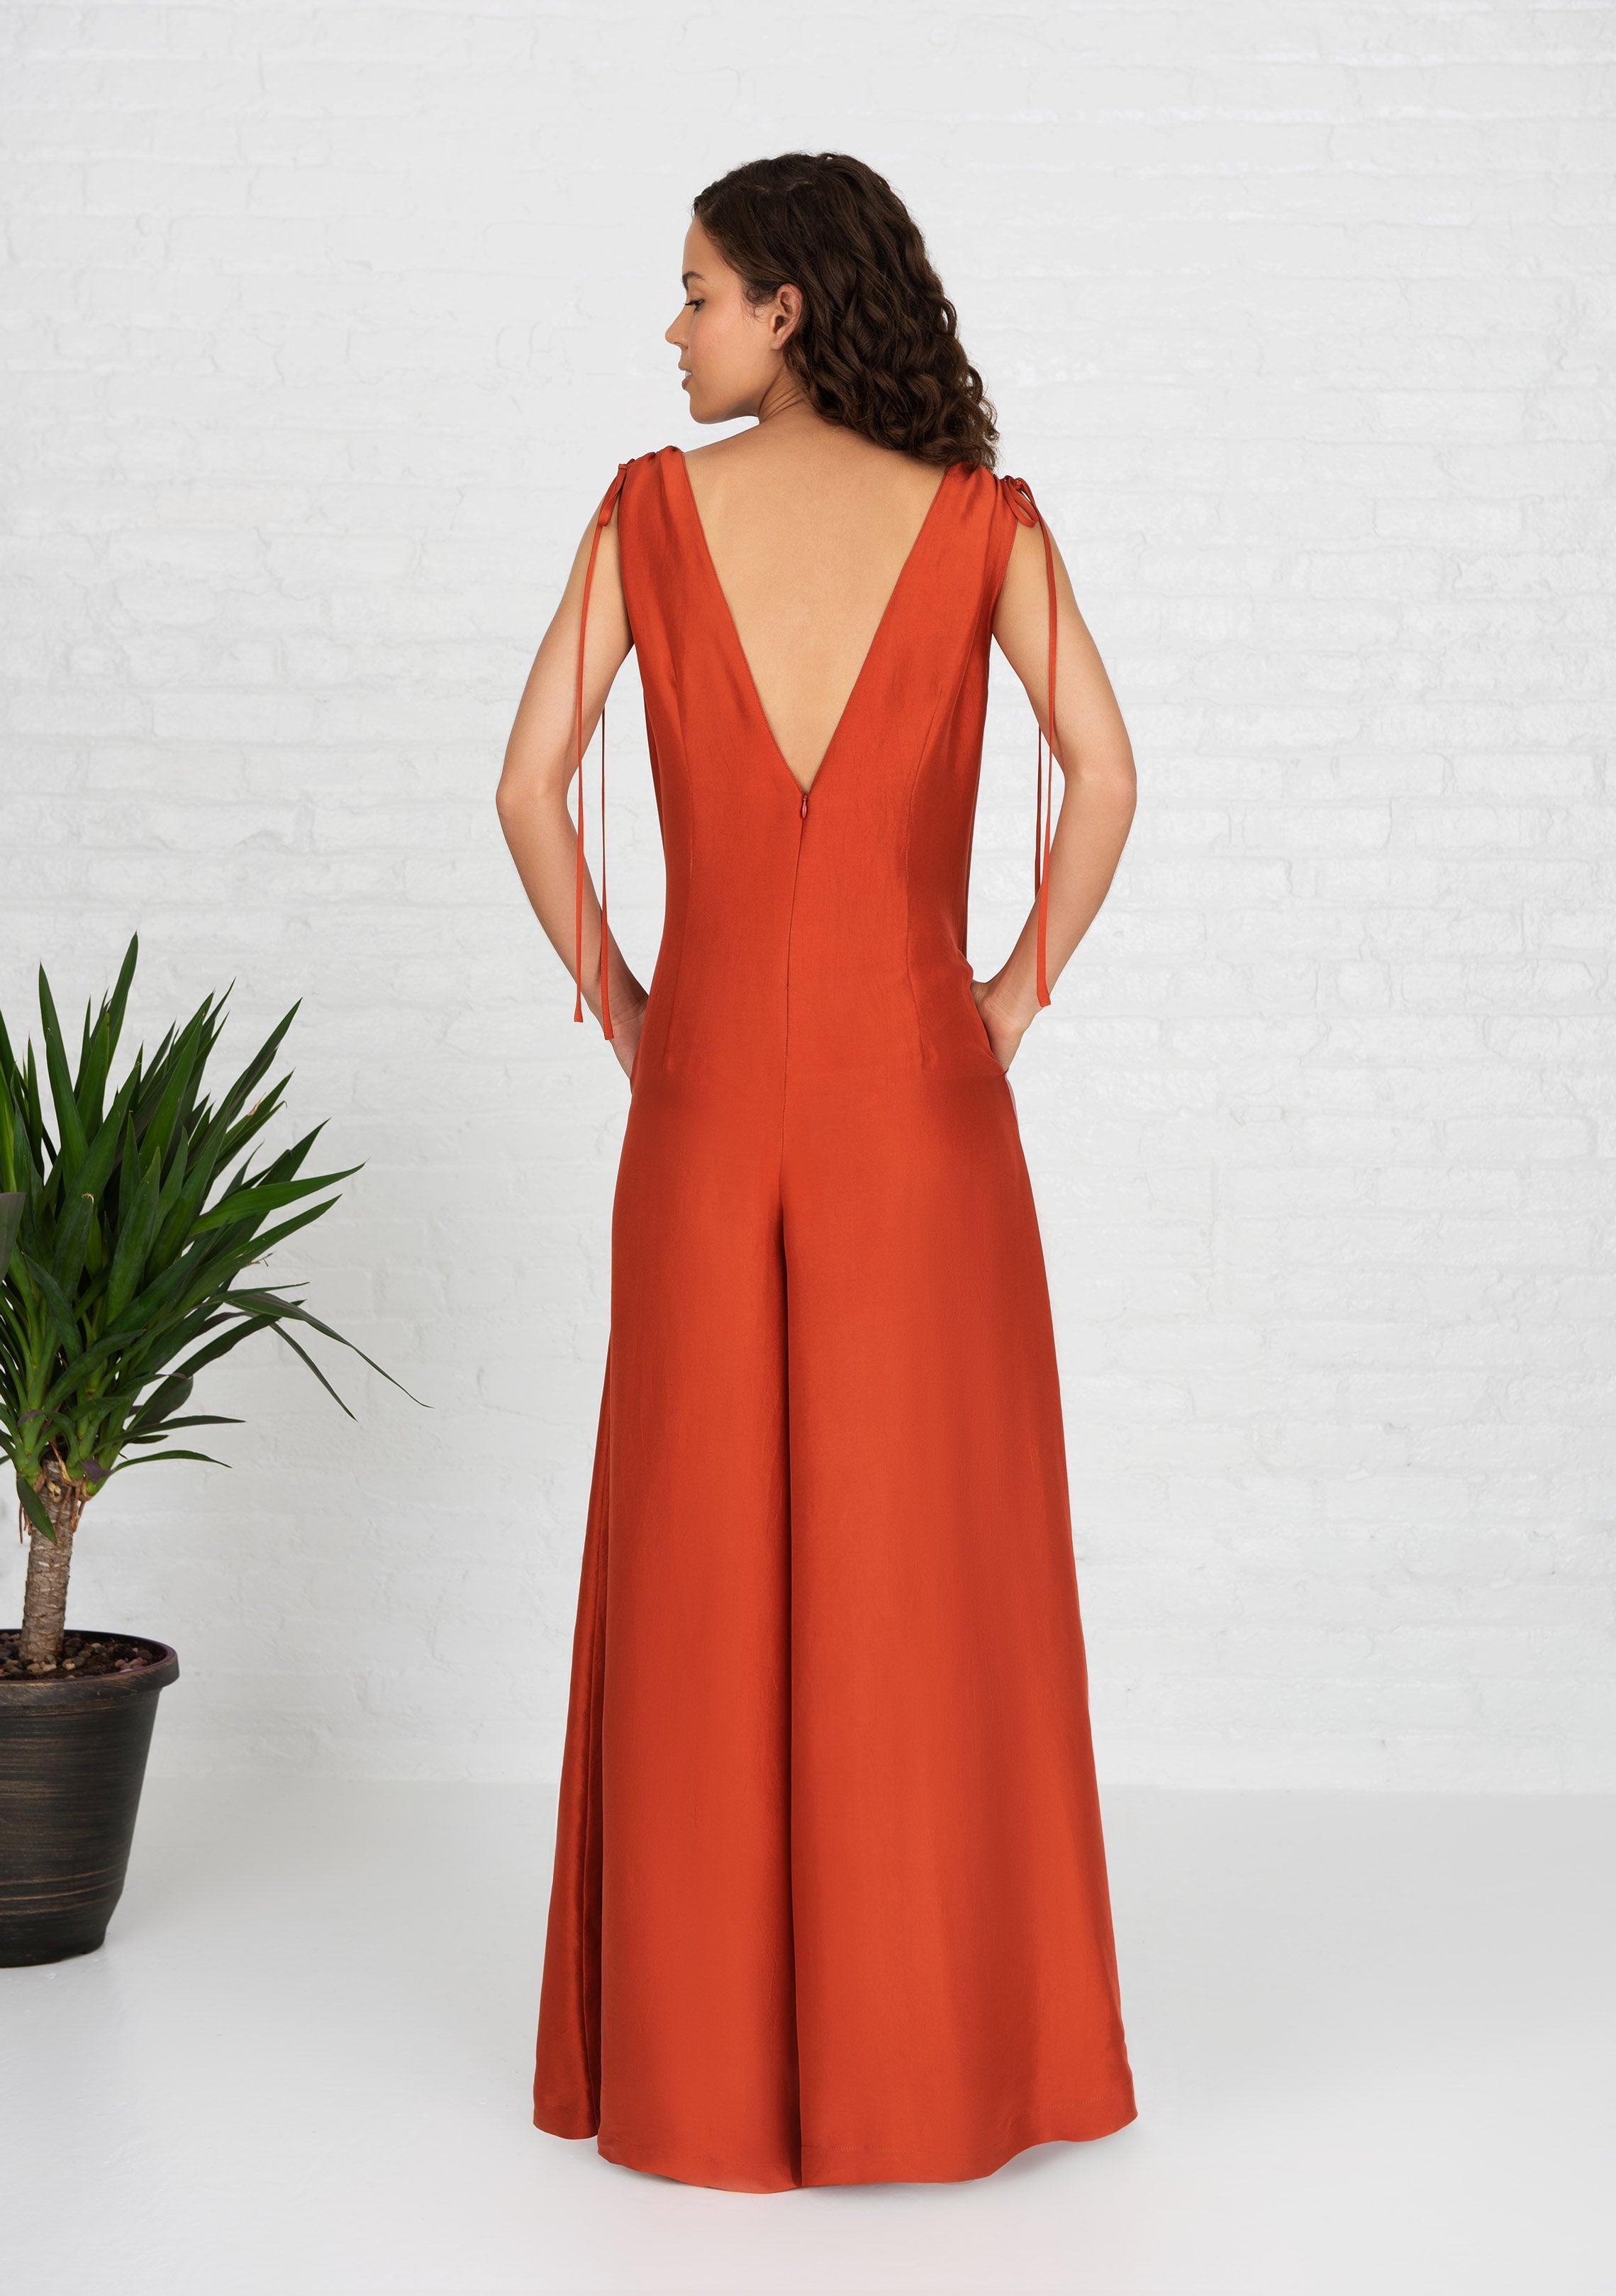 back profile view of woman wearing burnt orange sleeveless silk jumpsuit with hands in her pockets